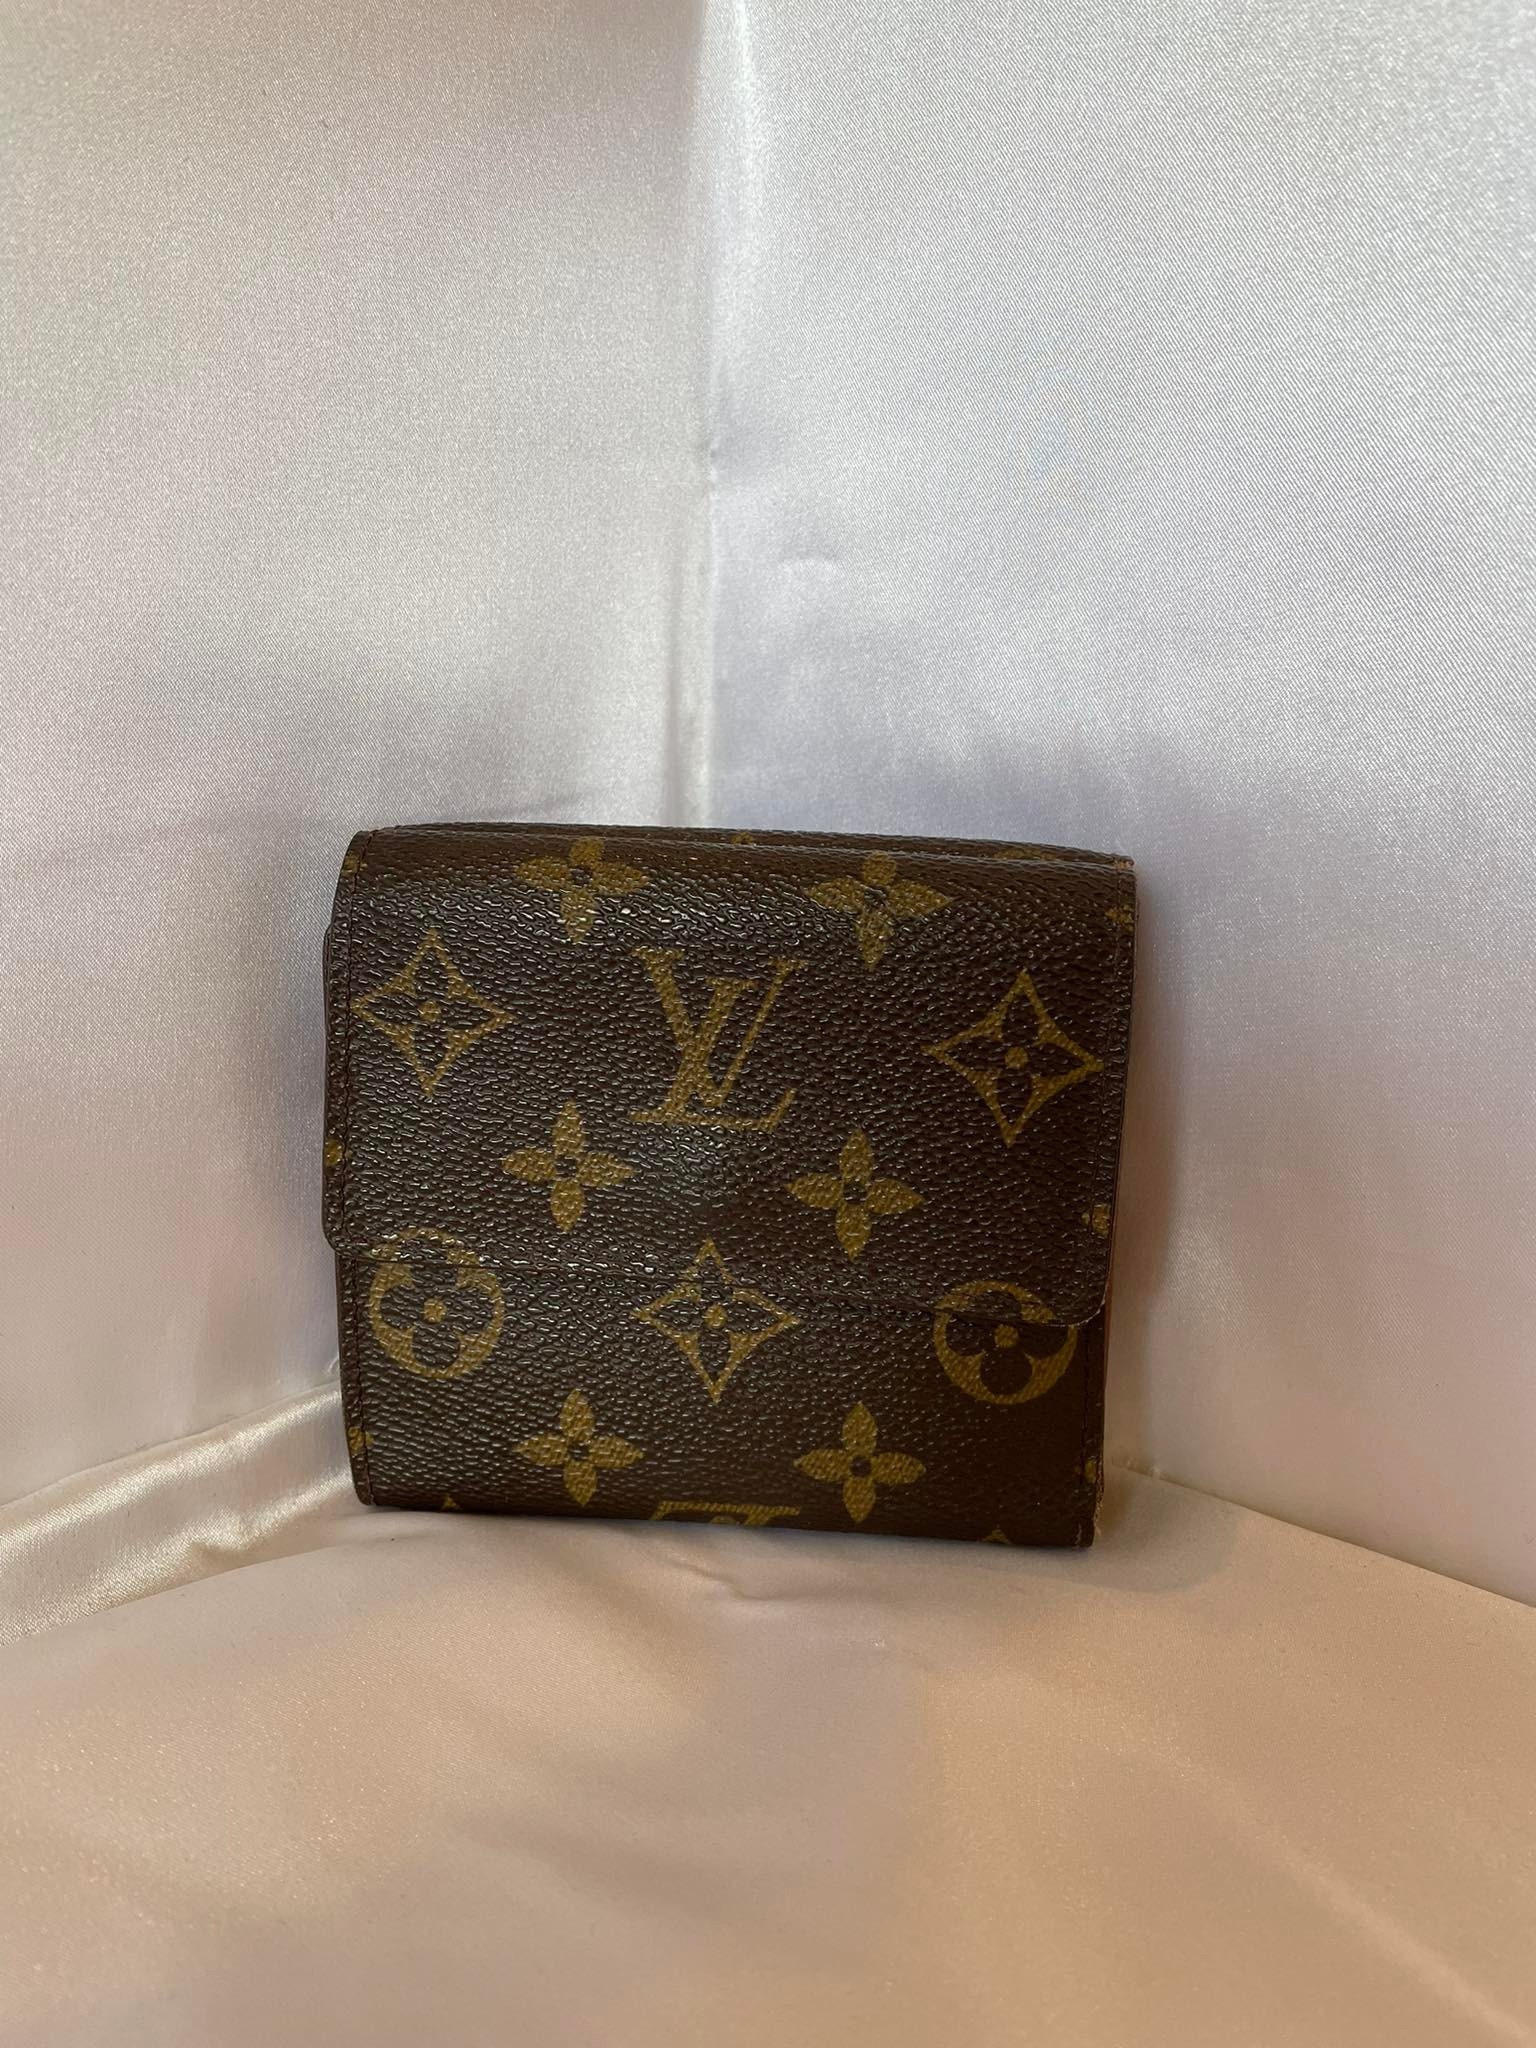 Louis Vuitton Cherrywood Portefeuille Wallet Stamped FH4179 